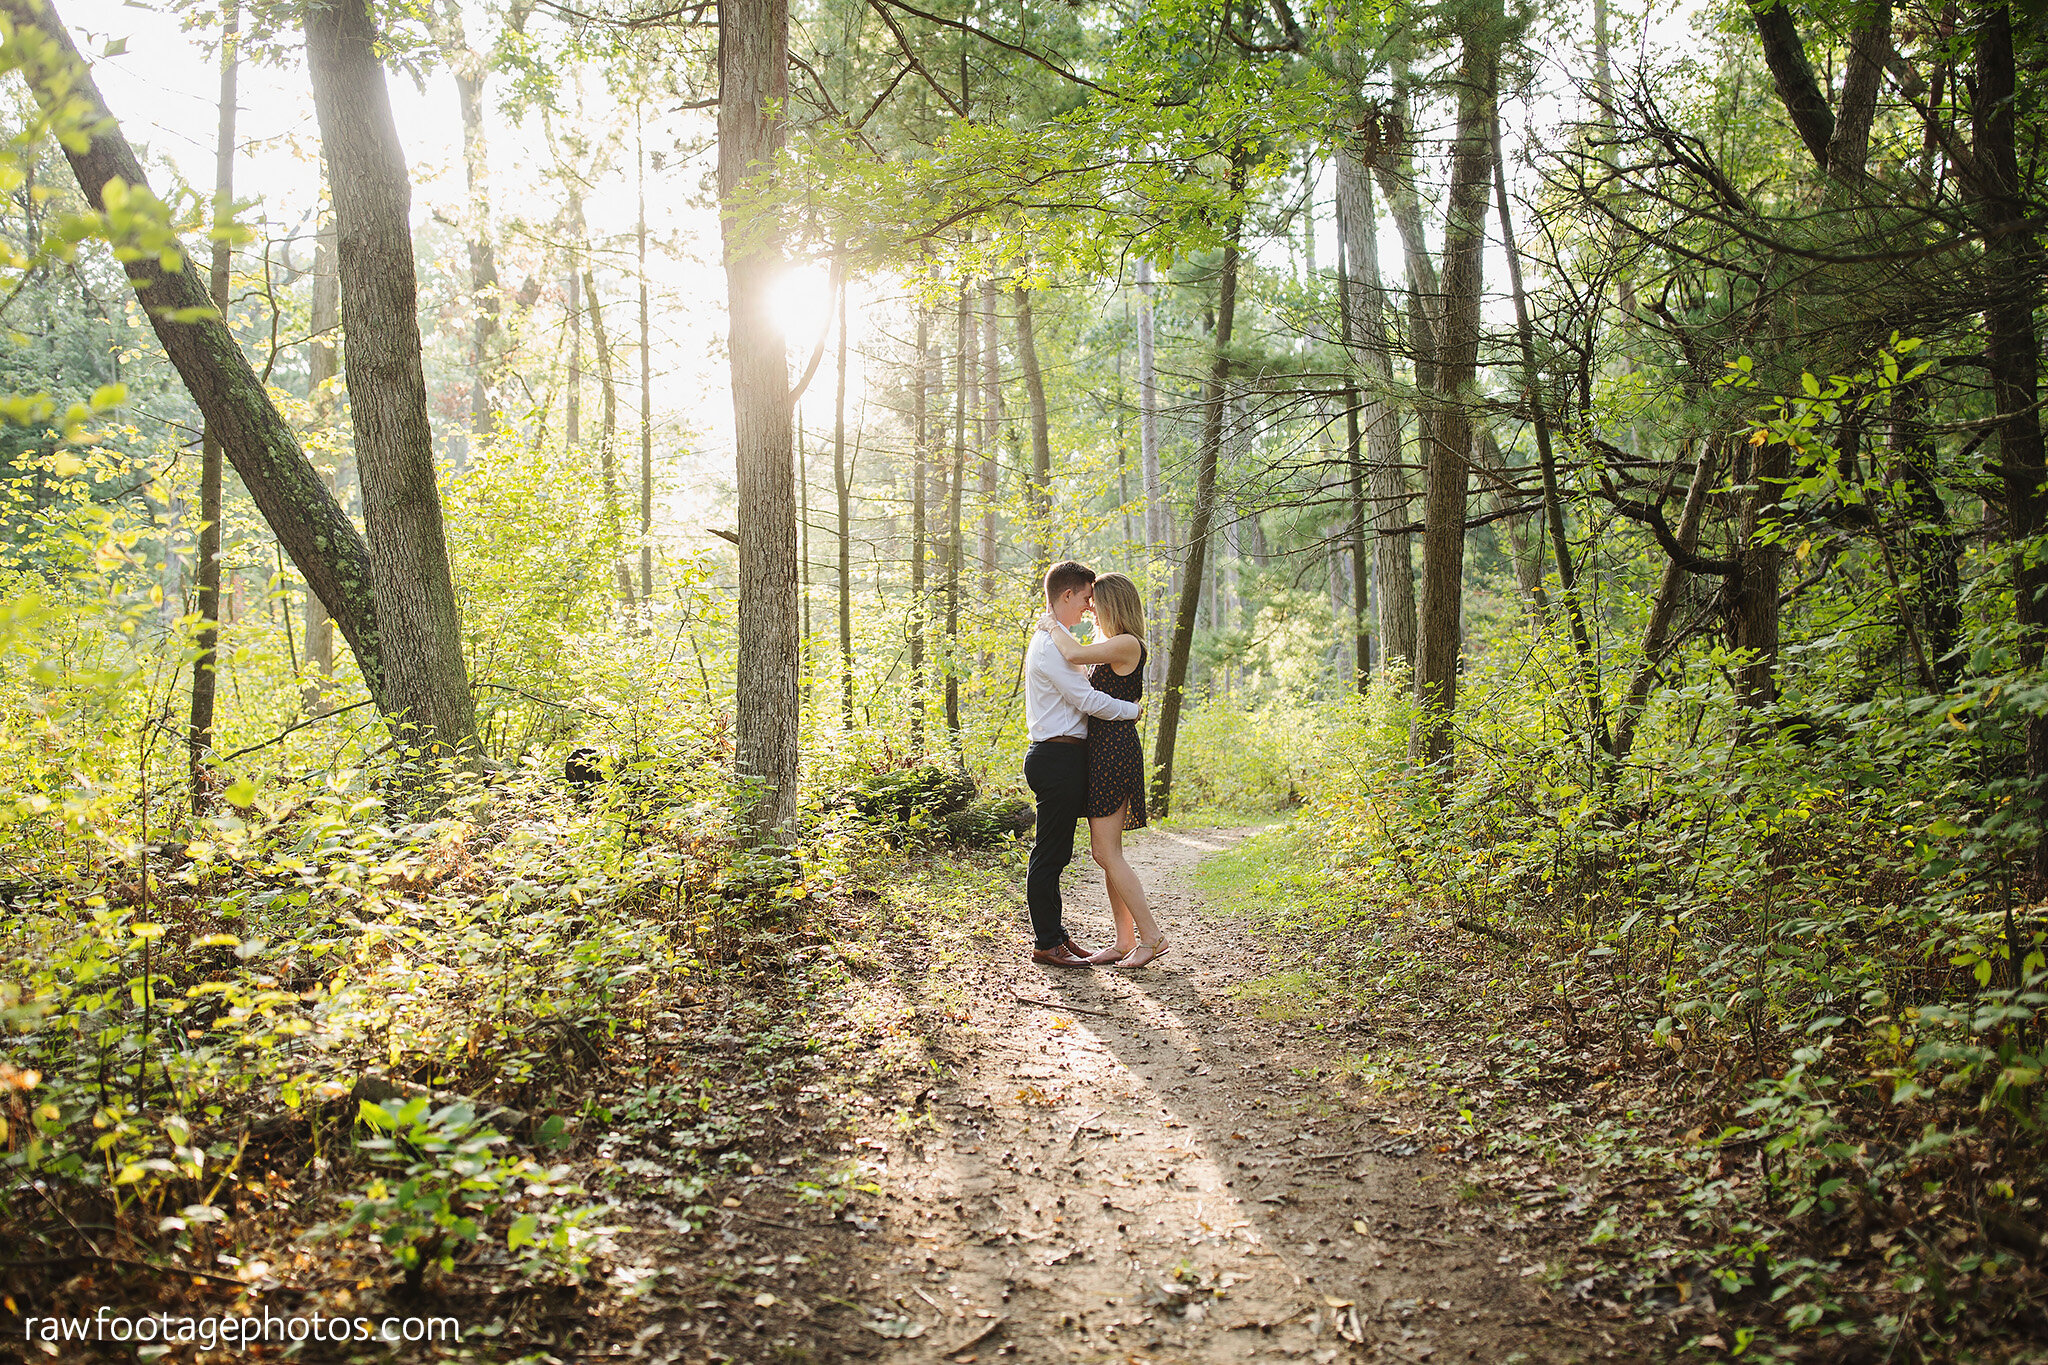 london_ontario_wedding_photographer-grand_bend_engagement_session-beach_engagement-sunset-forest-woods-raw_footage_photography002.jpg